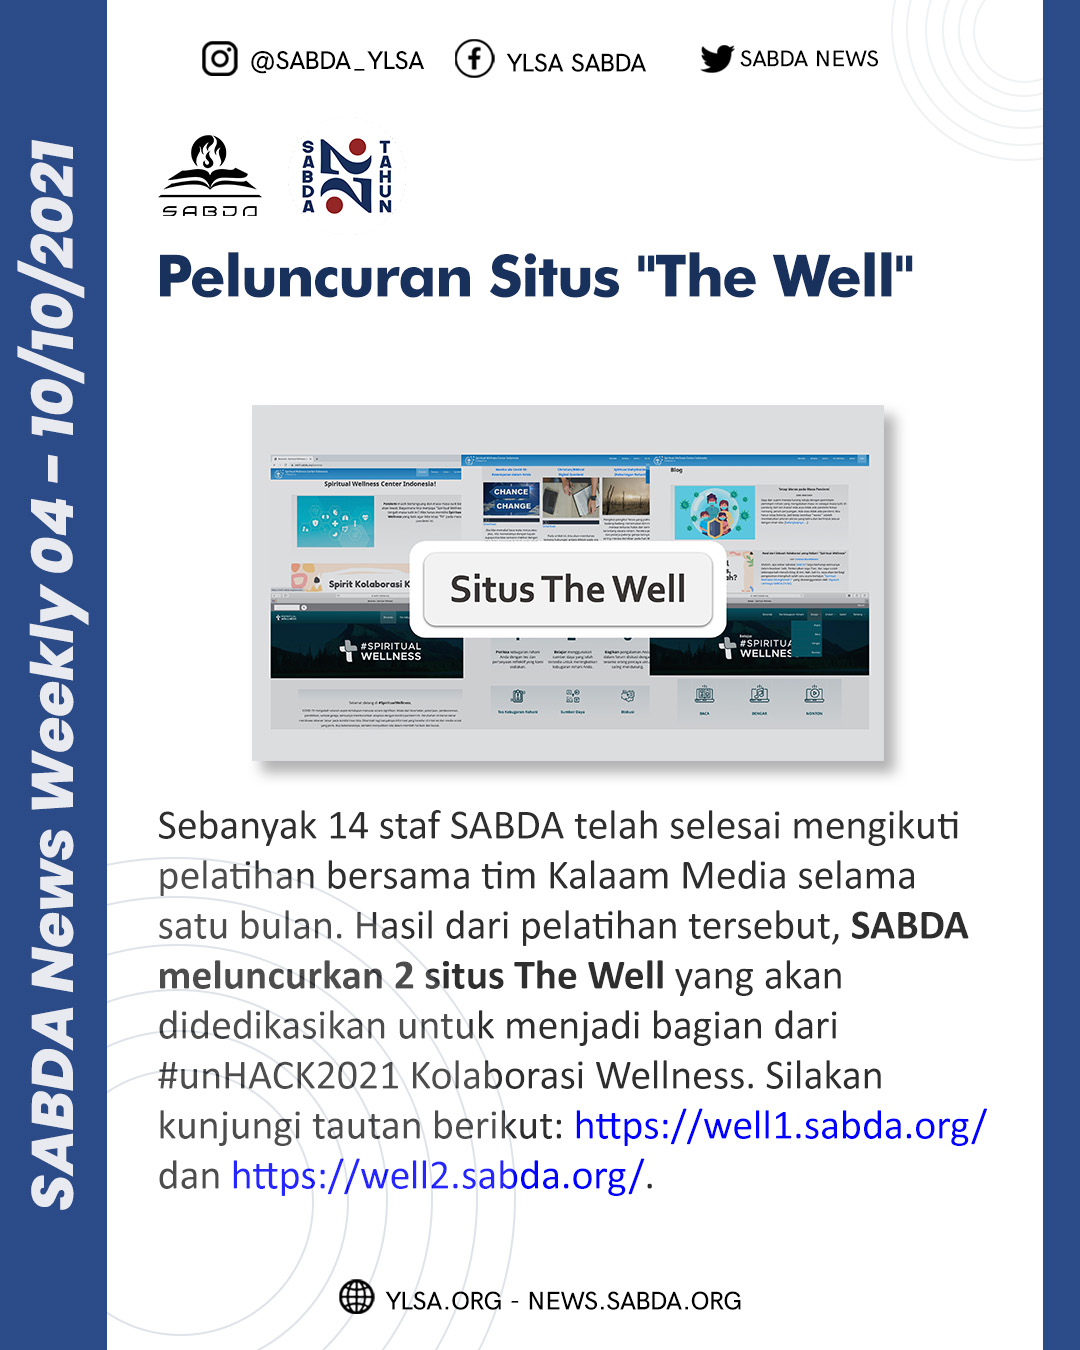 Situs The Well